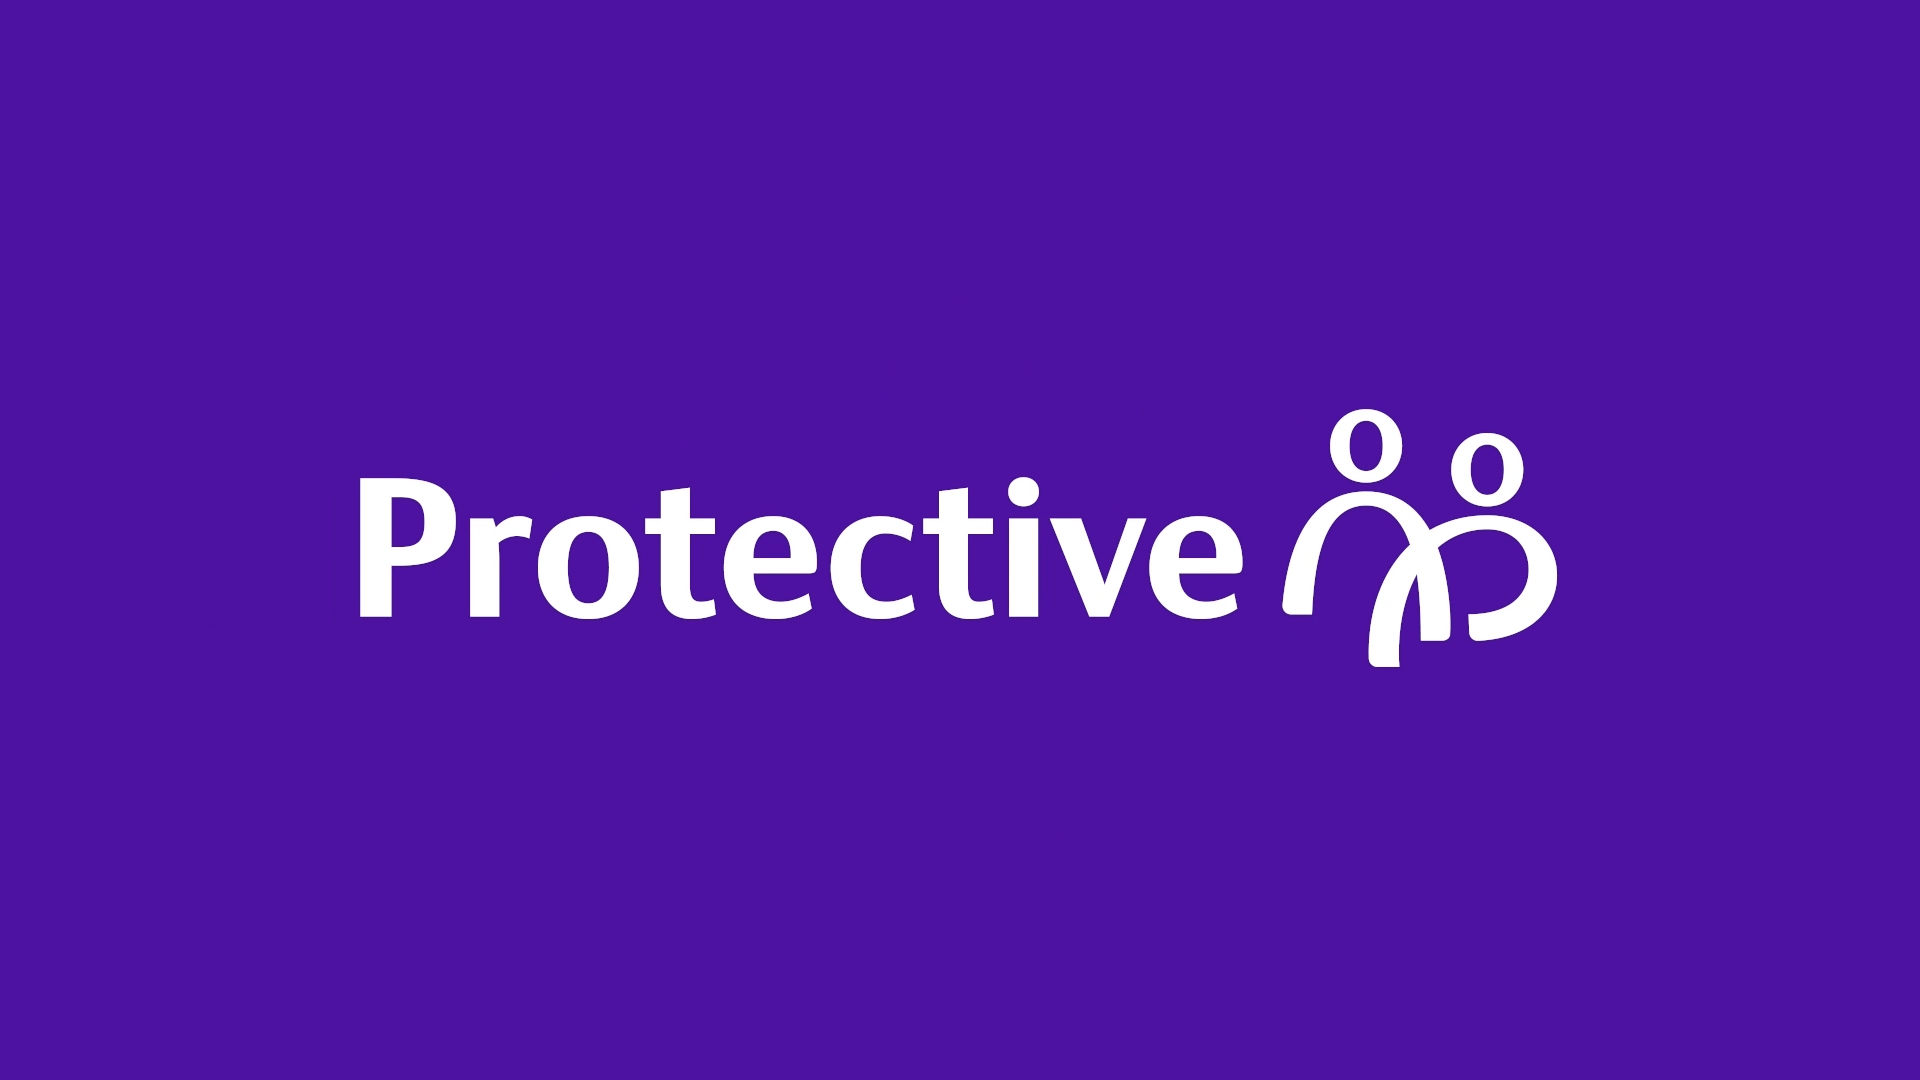 Protective's new brand identity exemplifies the Company’s 114-year commitment to putting people first, delivering on promises and striving to do more for its customers, business partners, employees and communities.